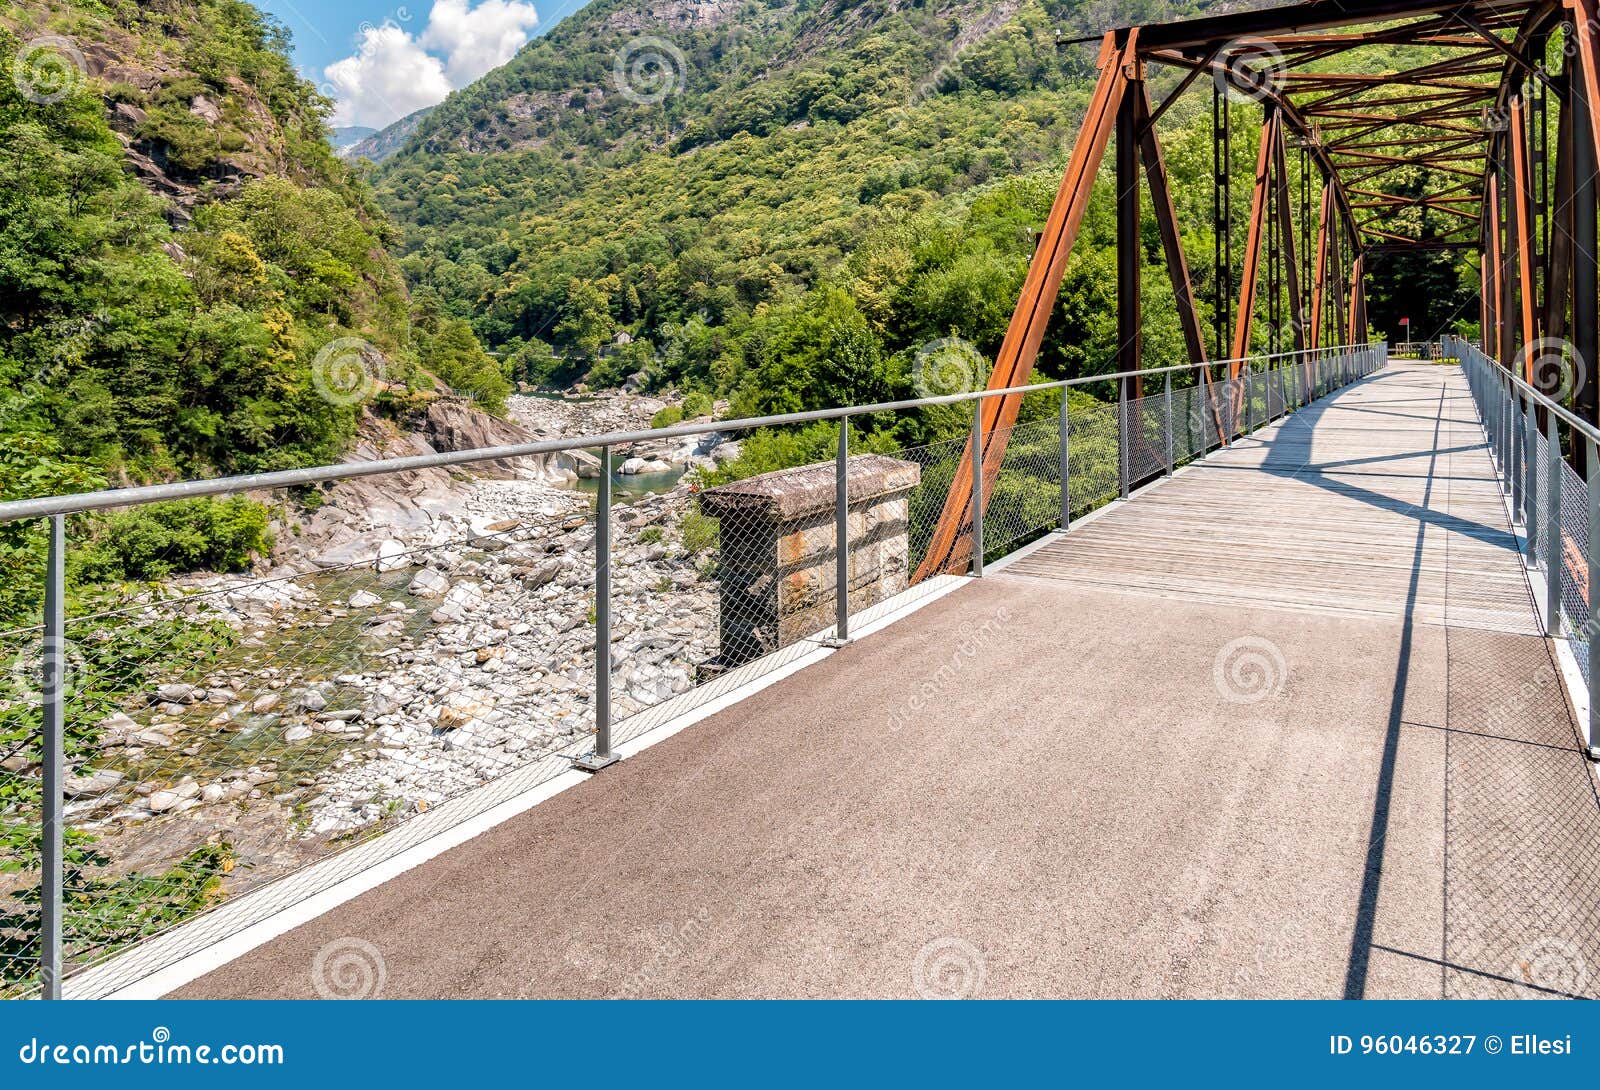 bridge of the vallemaggia route in the canton of ticino in switzerland